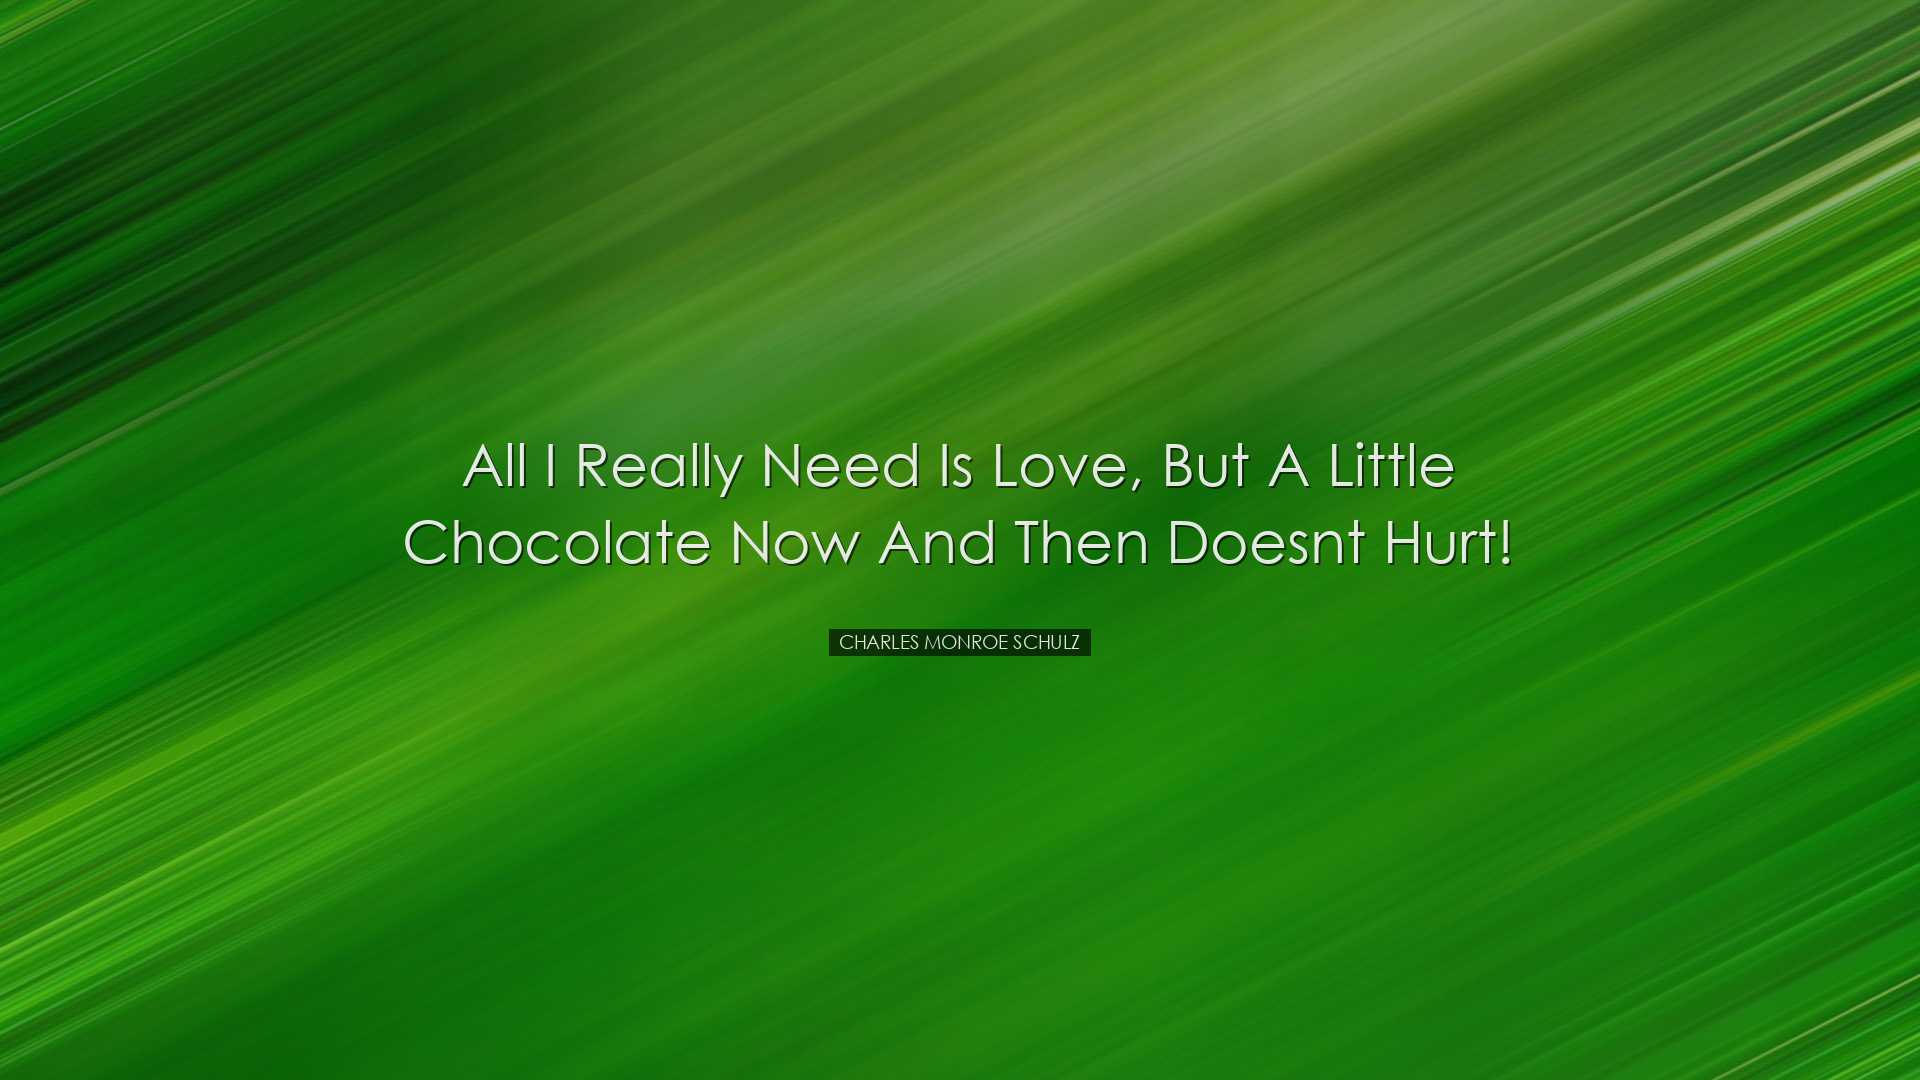 All I really need is love, but a little chocolate now and then doe